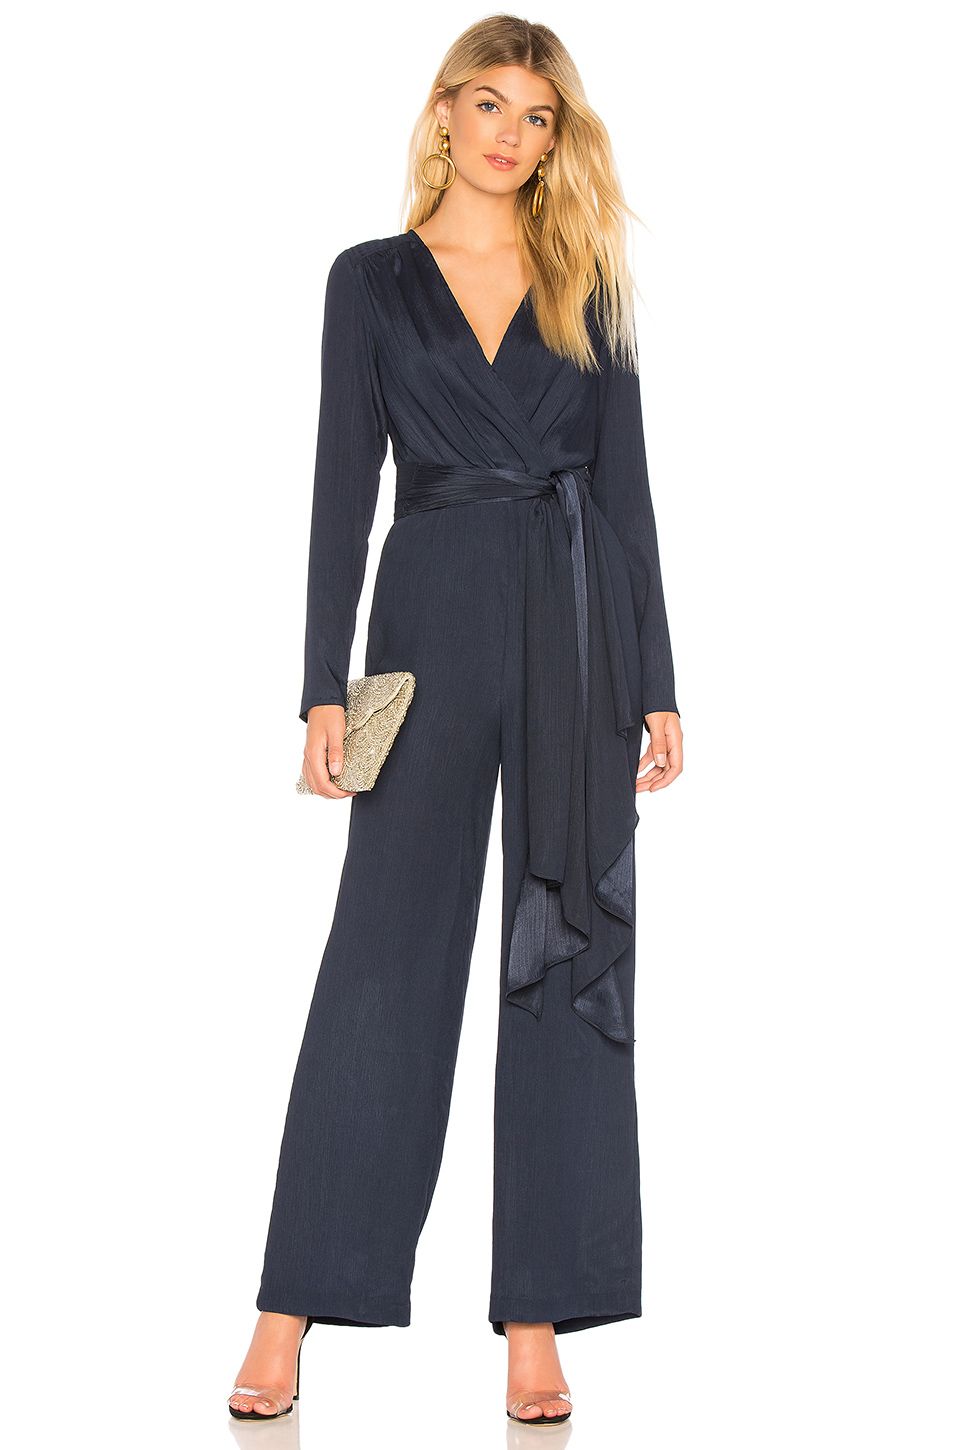 dress up a jumpsuit for a wedding